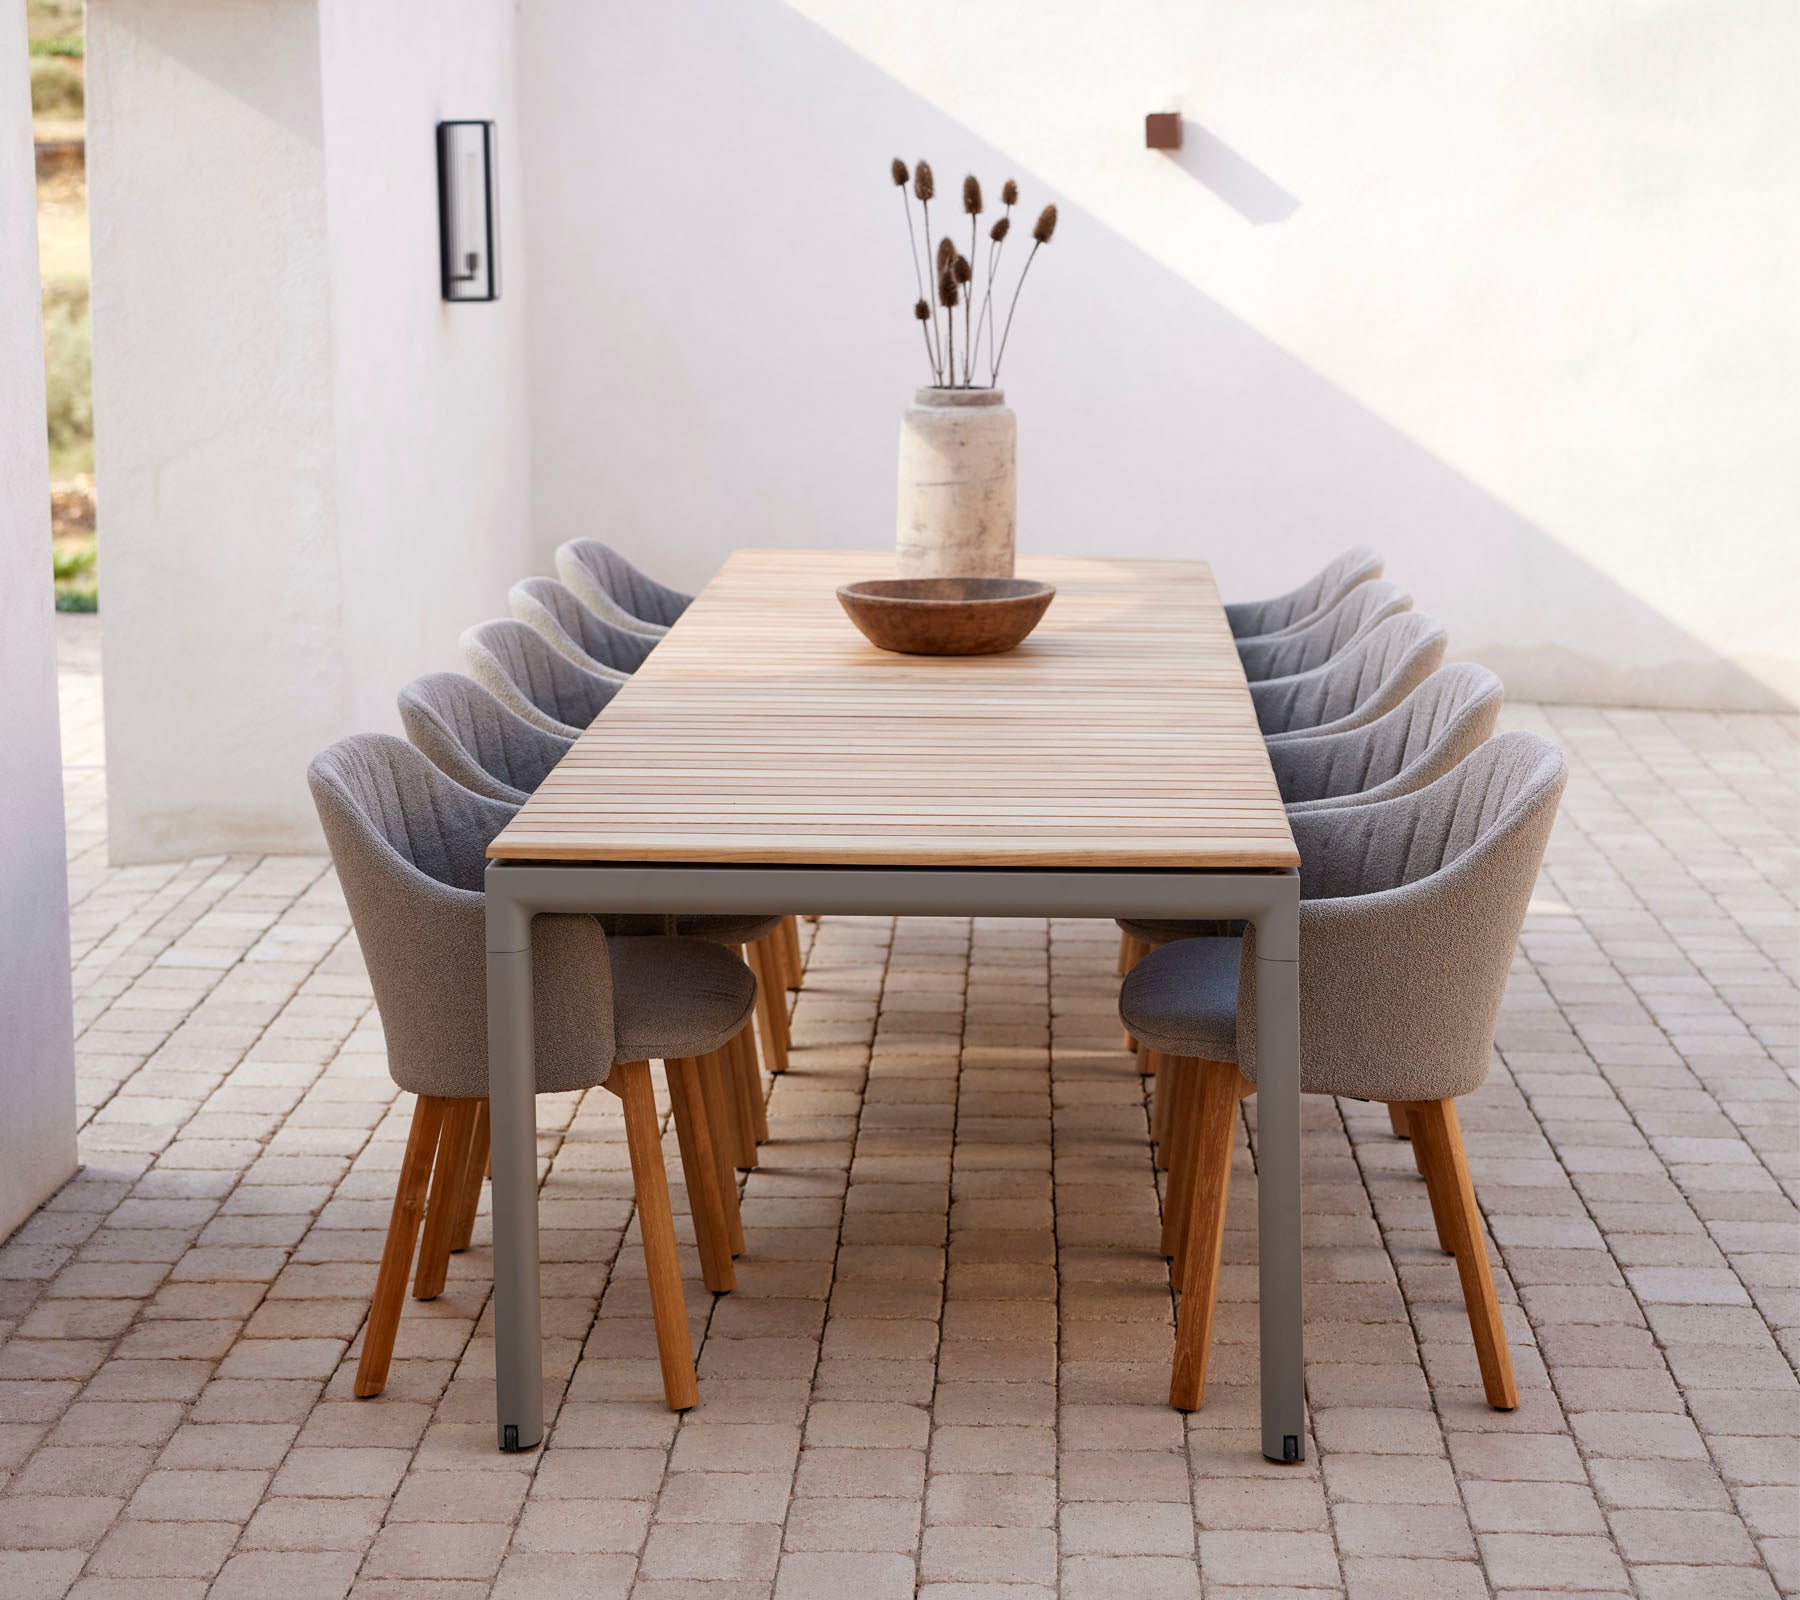 Drop dining table w/120 cm extension